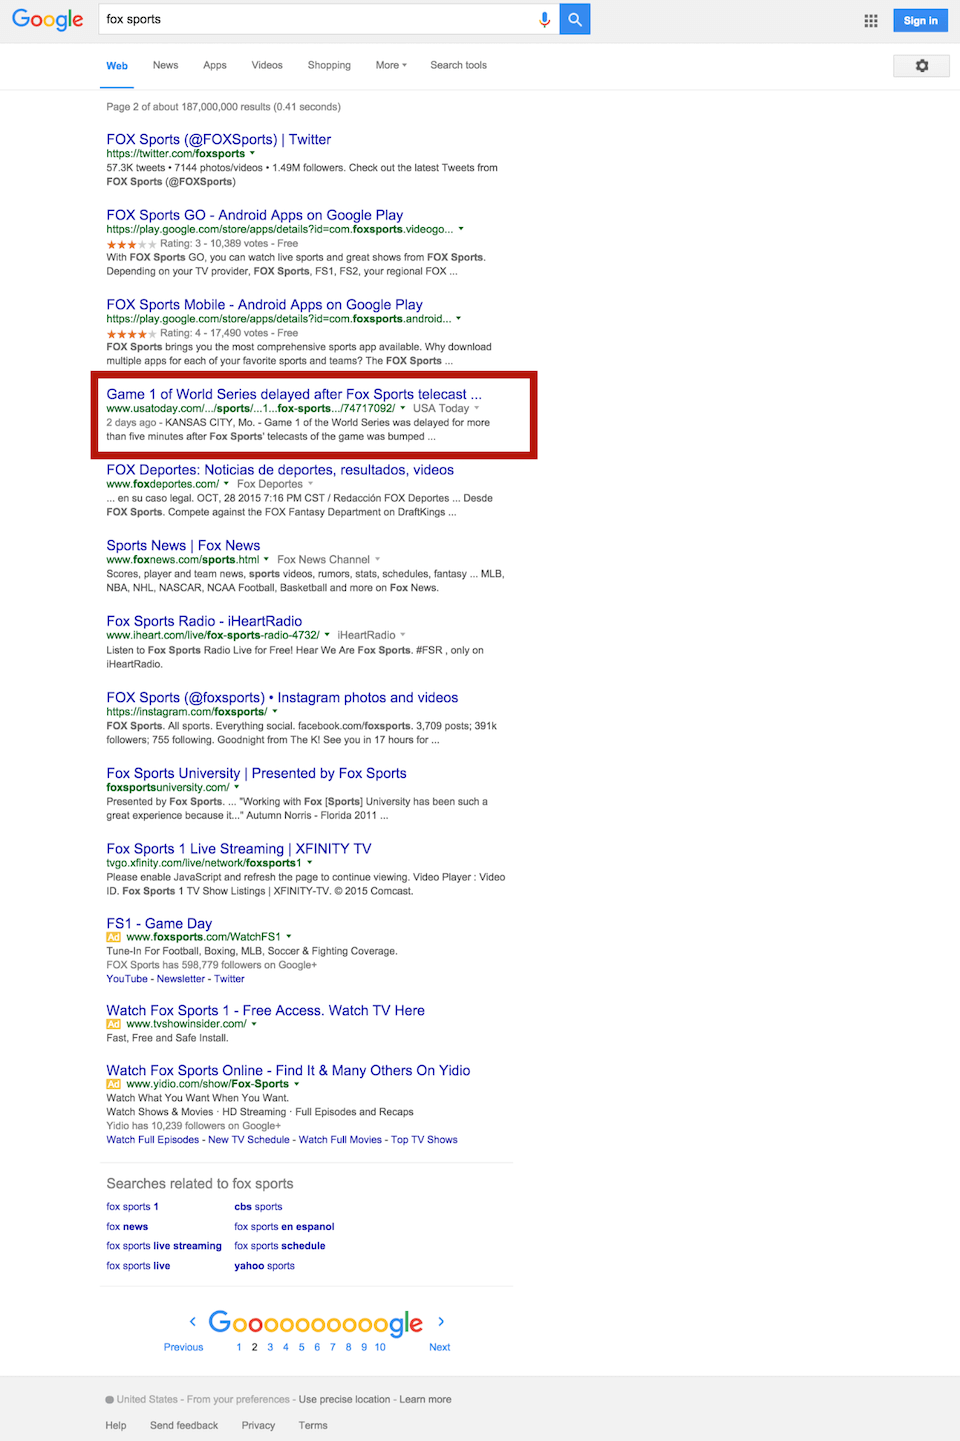 “Fox Sports” Google Search – Page 2 October 29, 2015 3:45pm ET